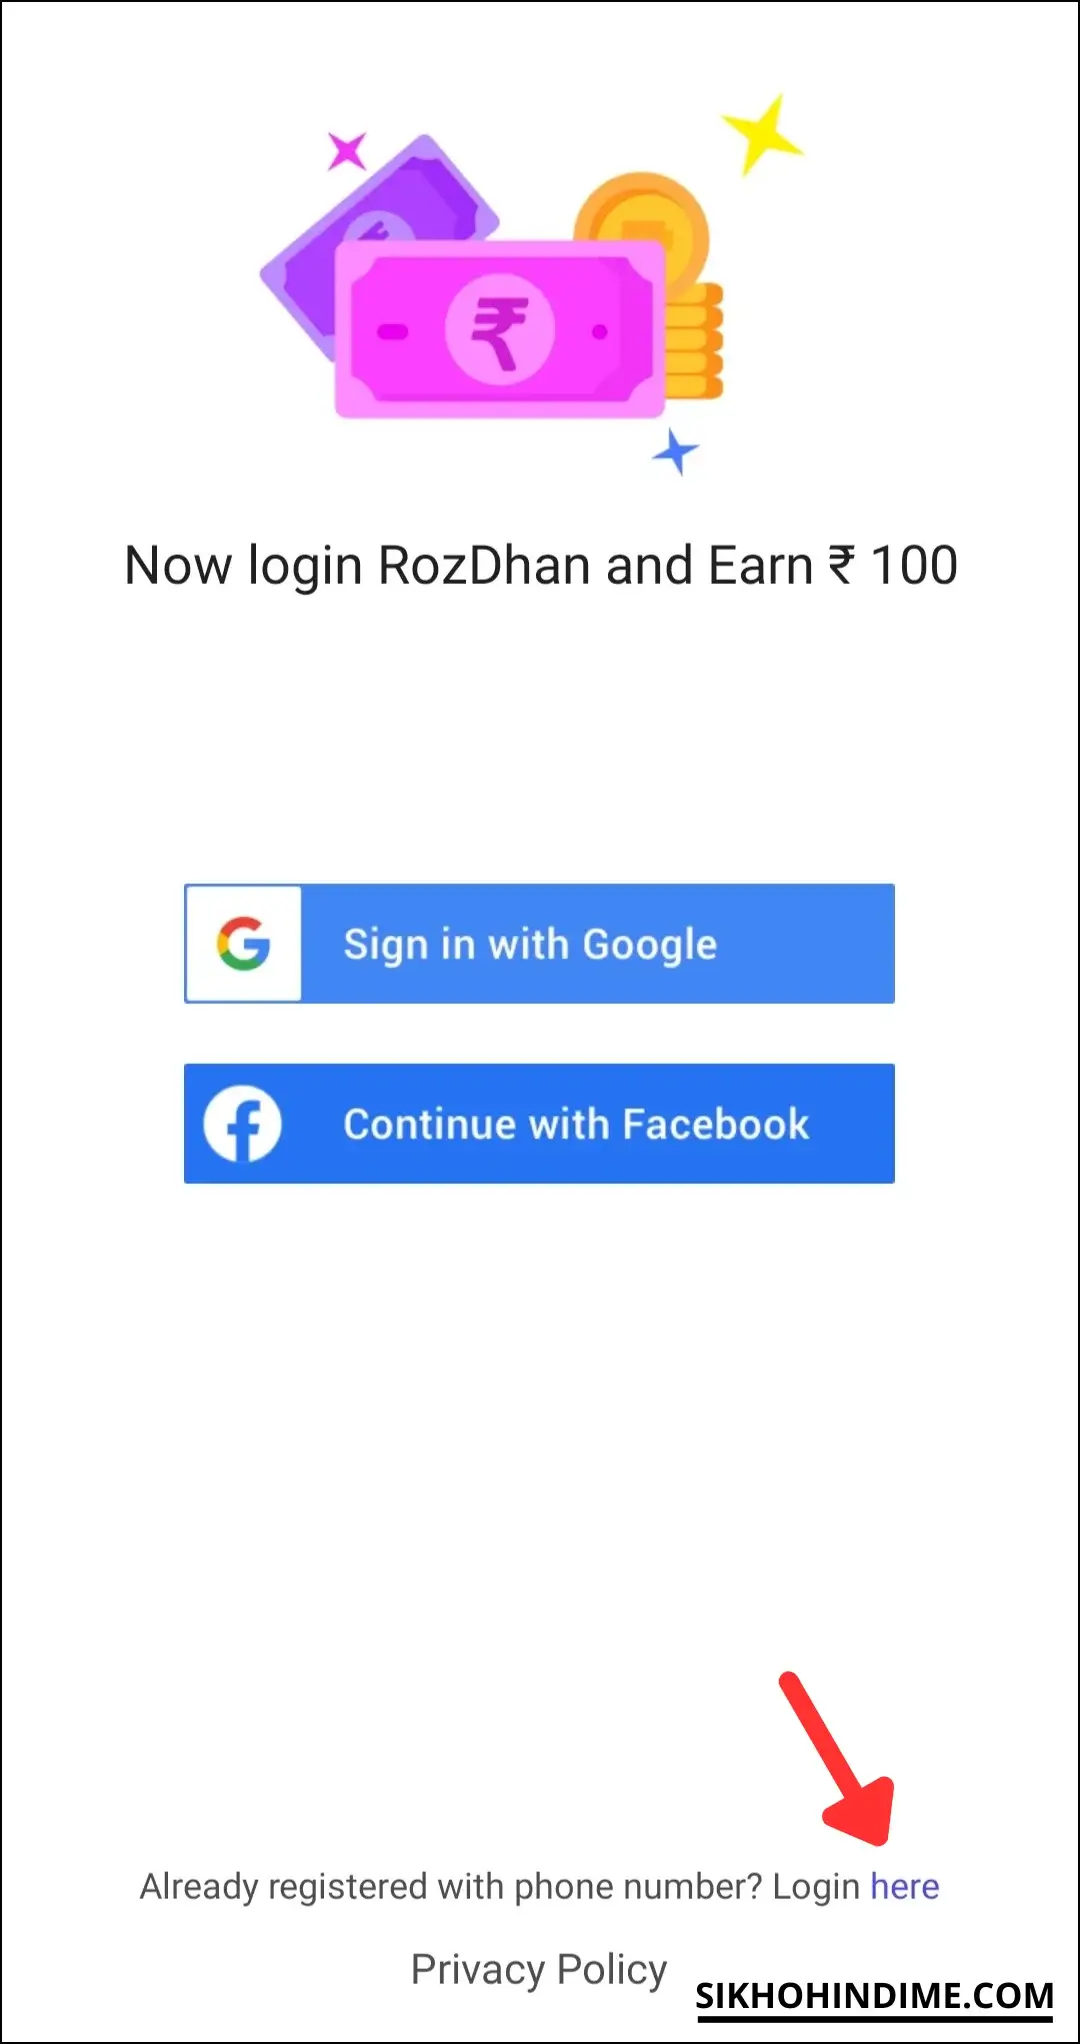 Create an account using the phone number